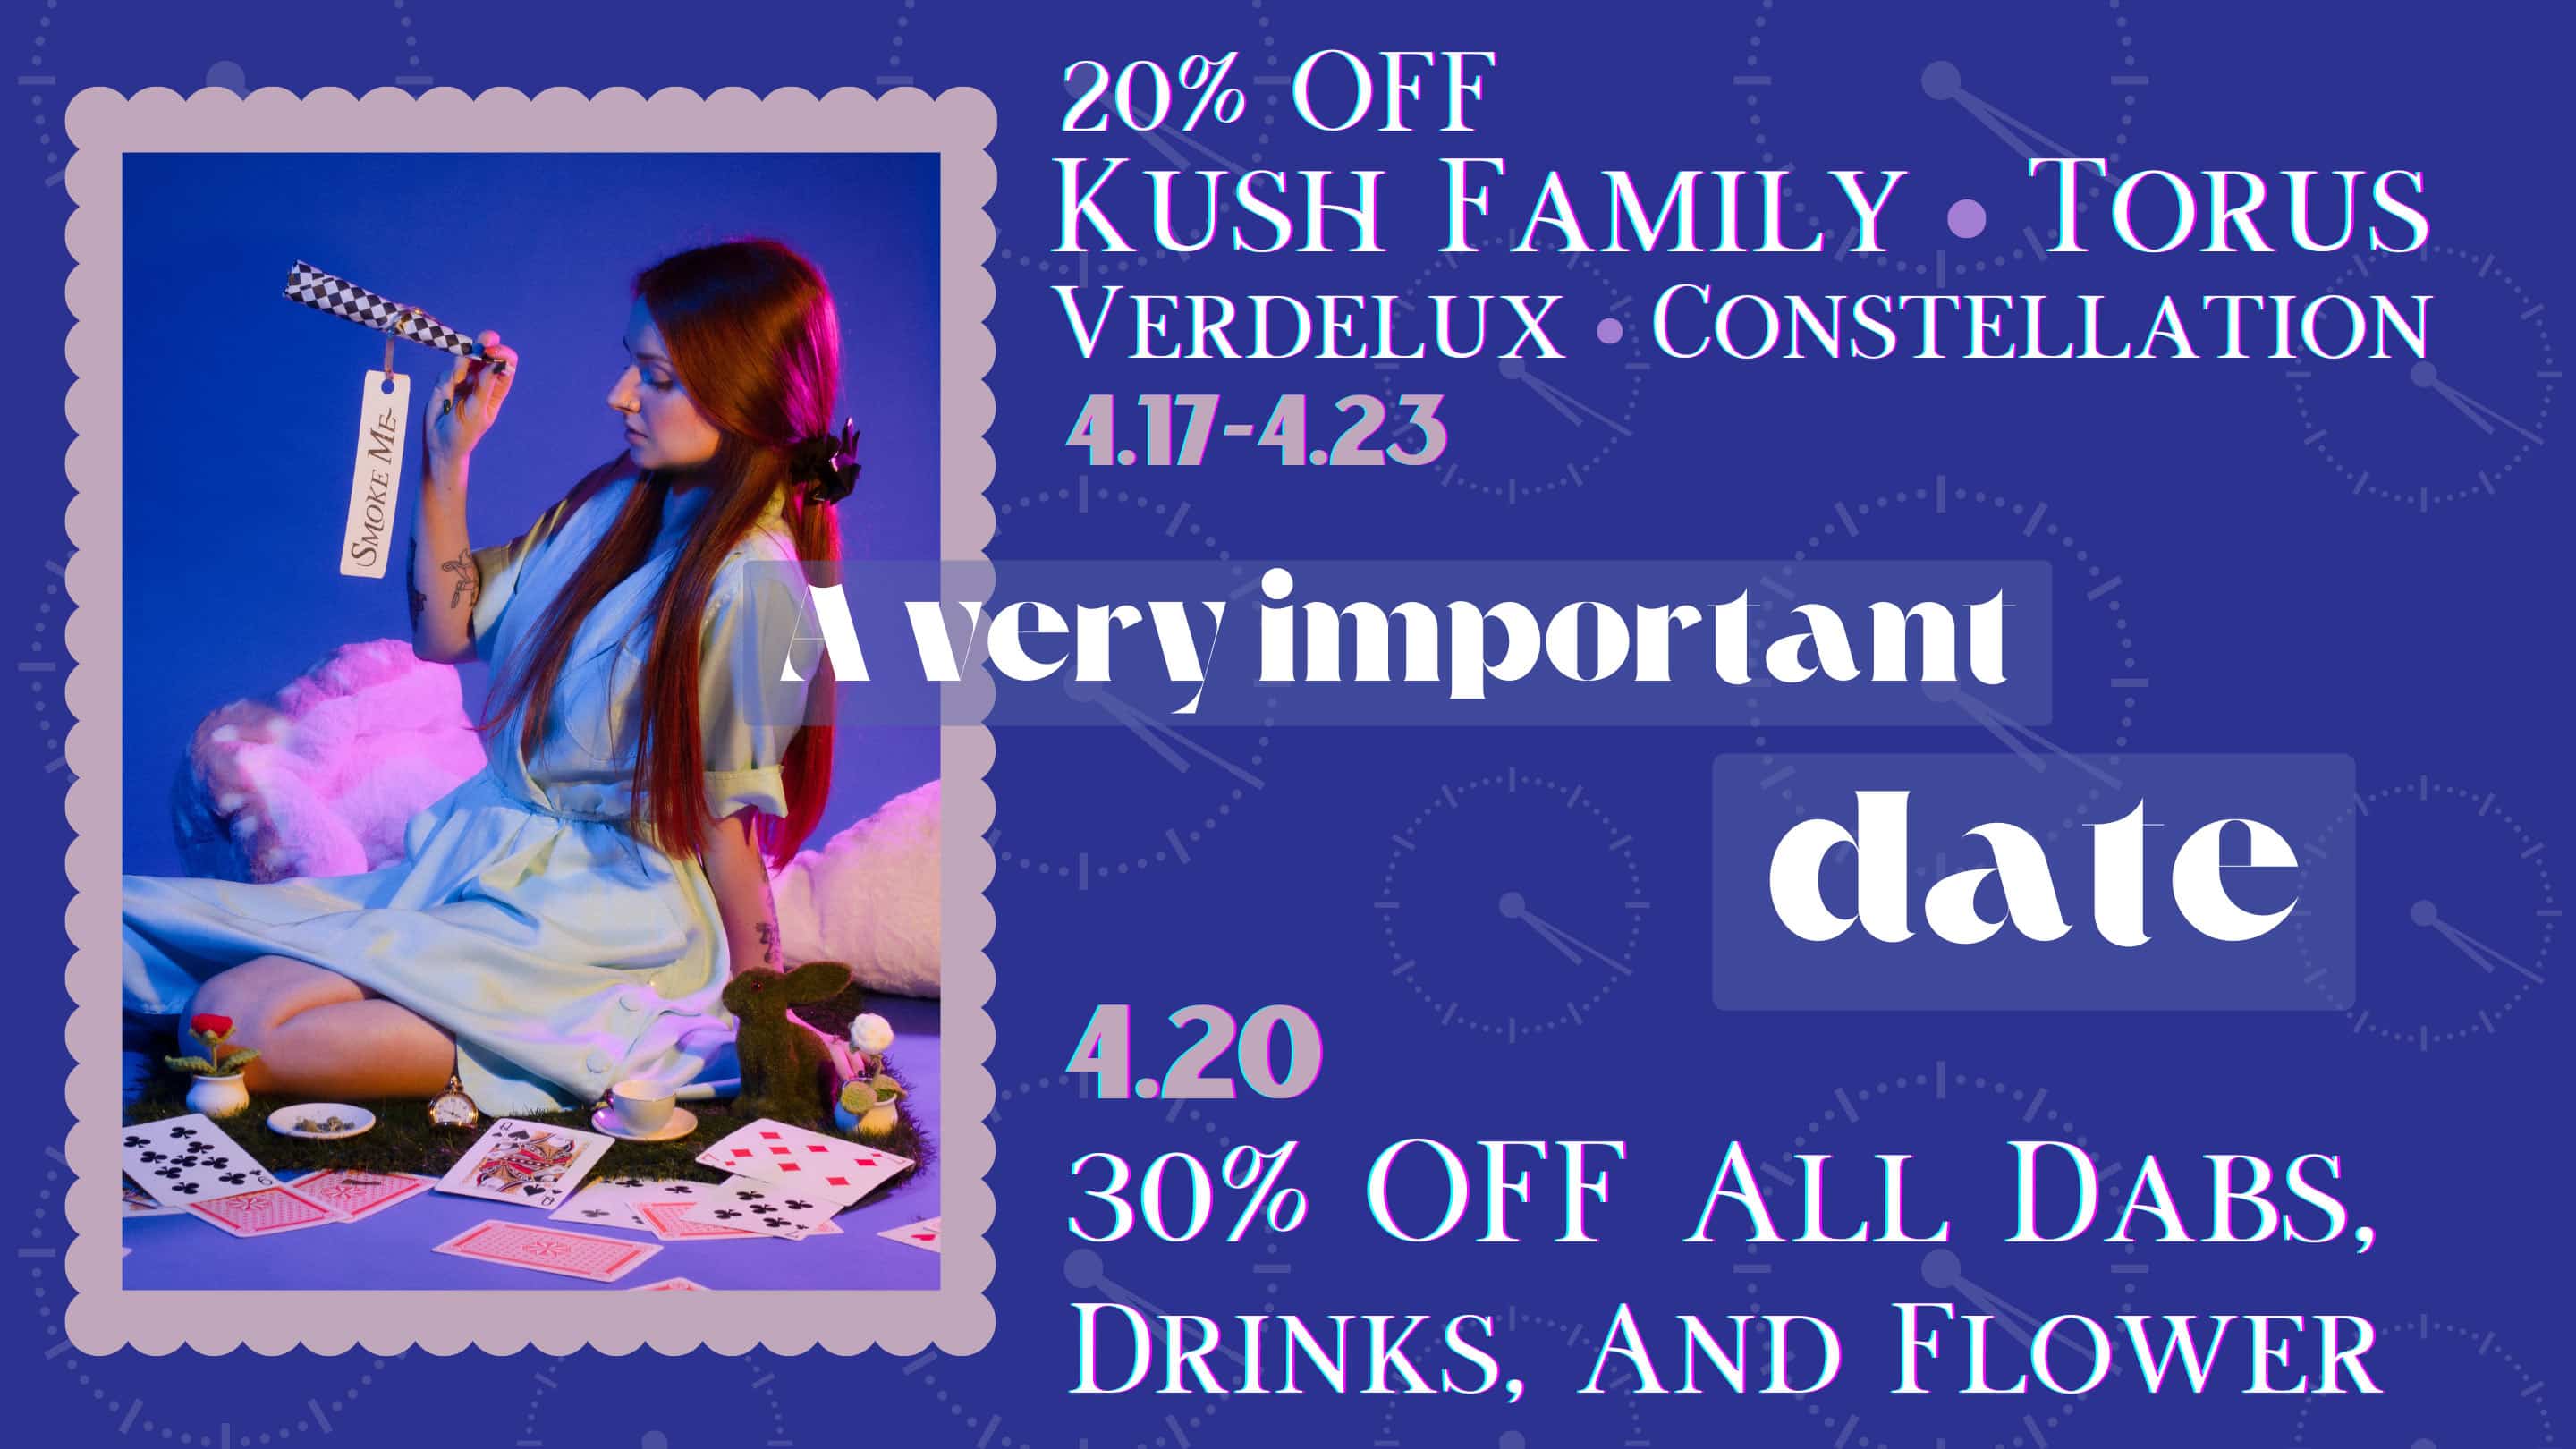 A very important date: 4/20! Take 20% off Kush Family, Torus, Verdelux, and Constellation now through April 23rd, and take 30% off all dabs drinks, and flower on 4/20.